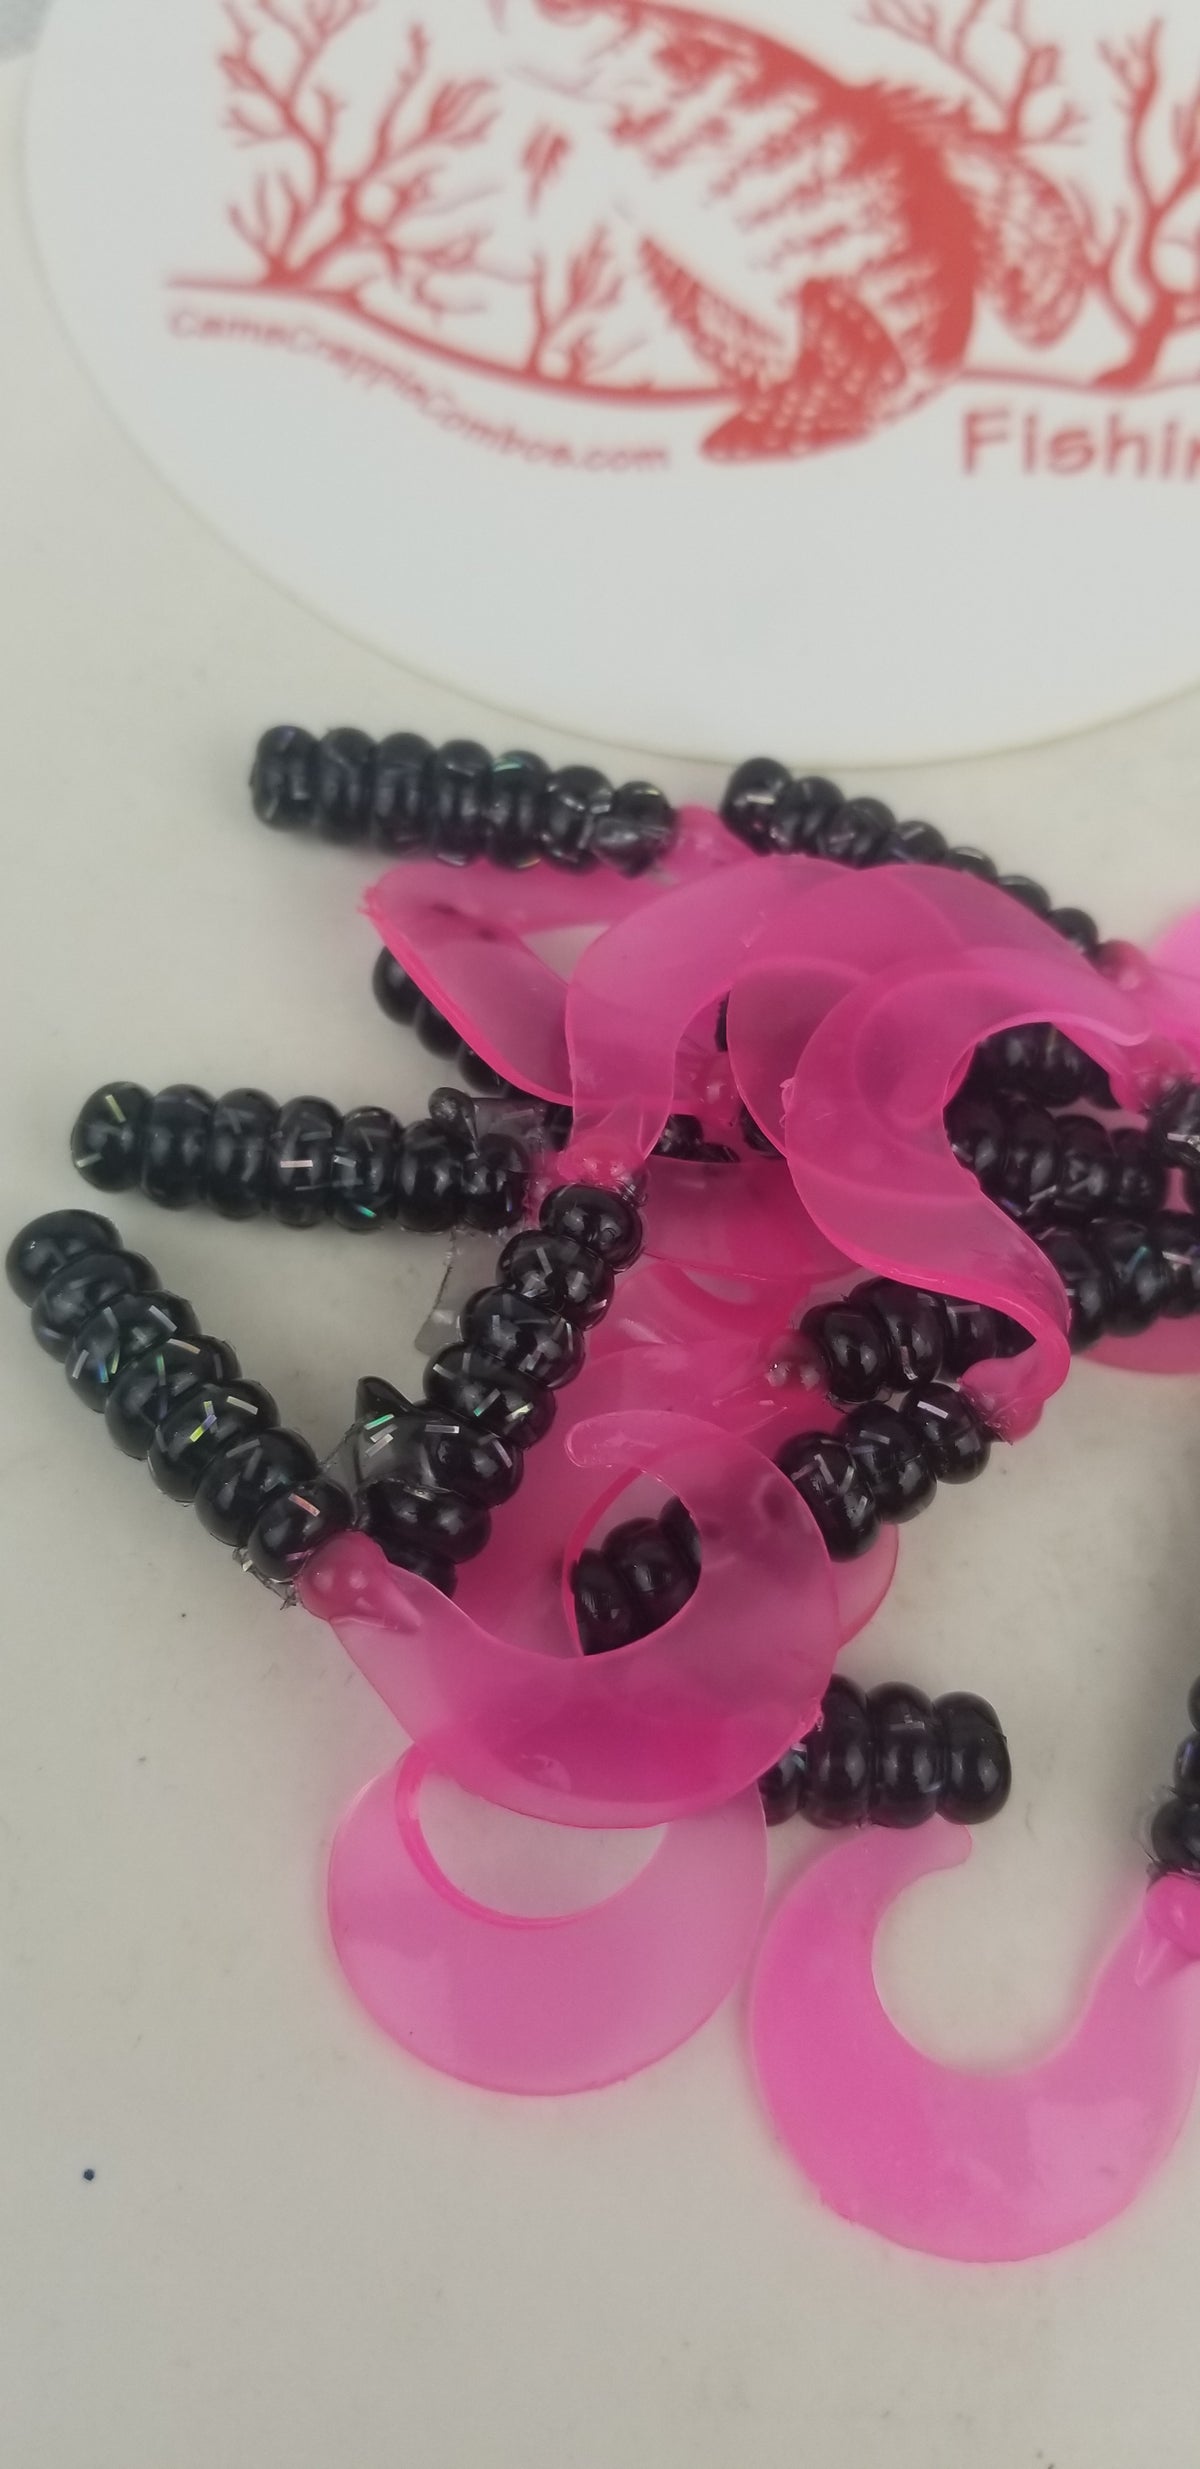 Cam's 2" BLACK BLAZE (HOLOGRAM FLAKE)  Curly Tail Grub 40pc  Crappie Soft Jigs  [A Cam's Exclusive]